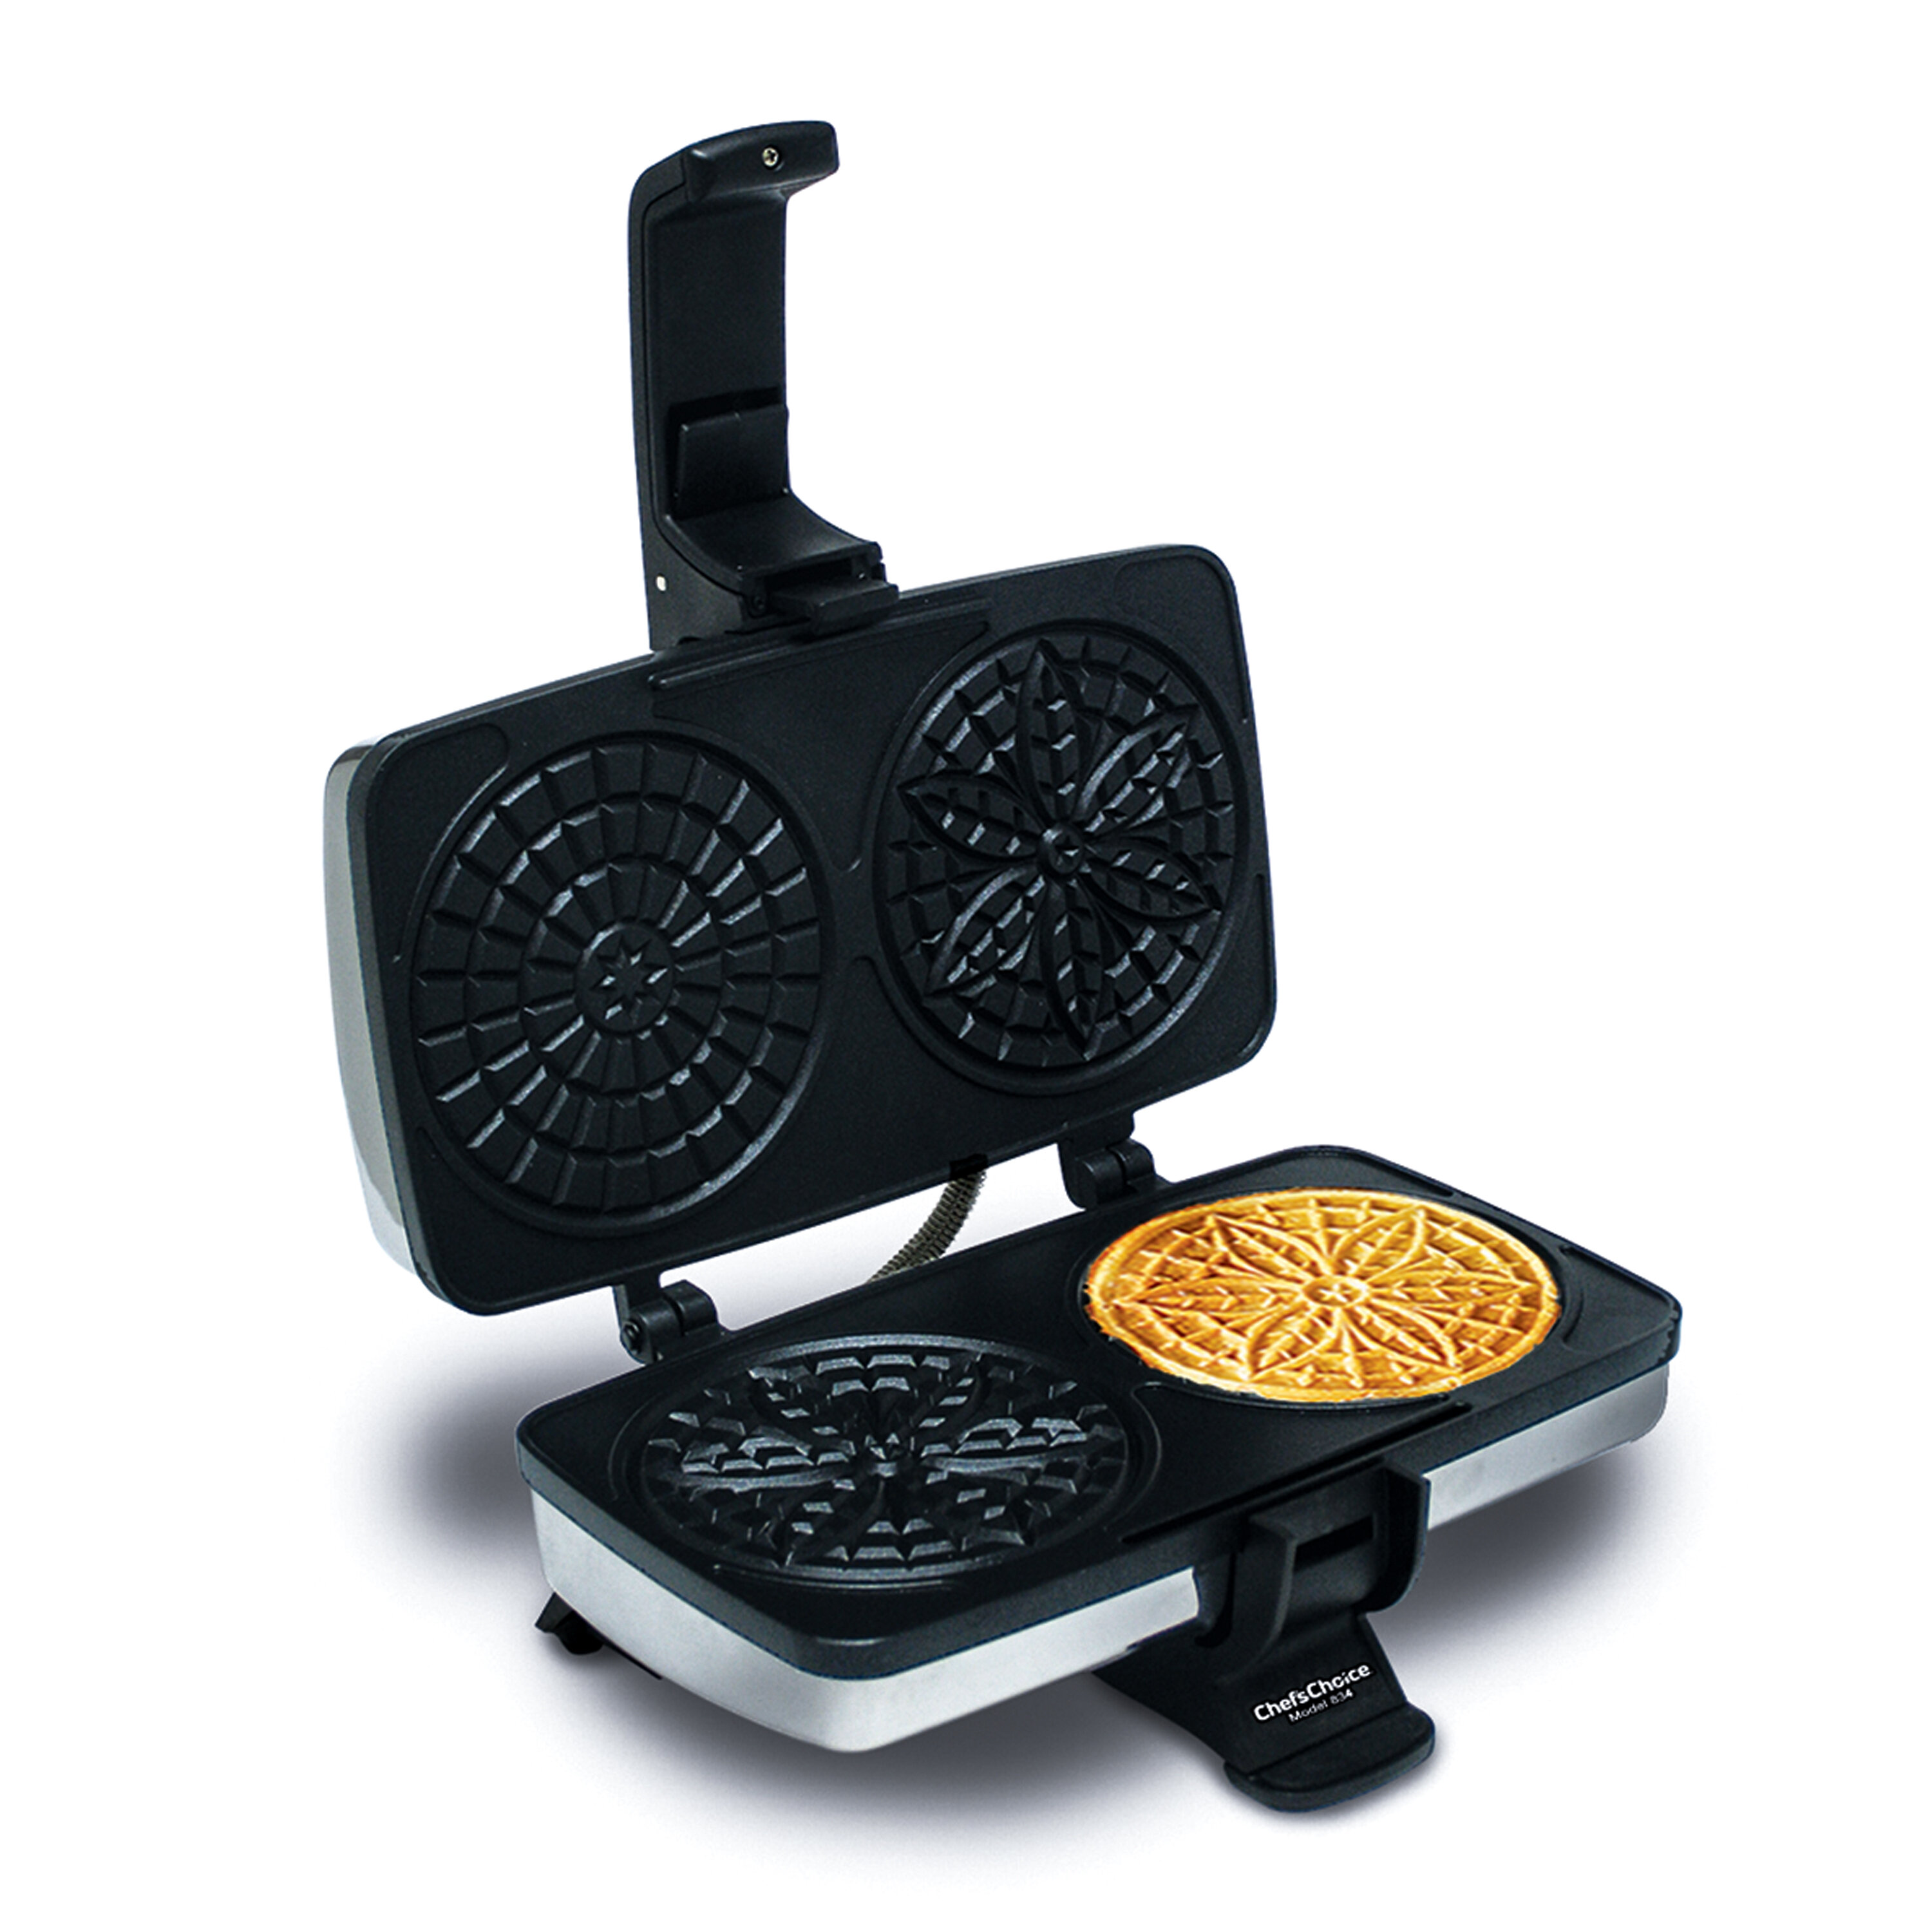 Pizzelle Maker- Non-Stick Electric Pizzelle Baker Press Makes Two 5-Inch Cookies